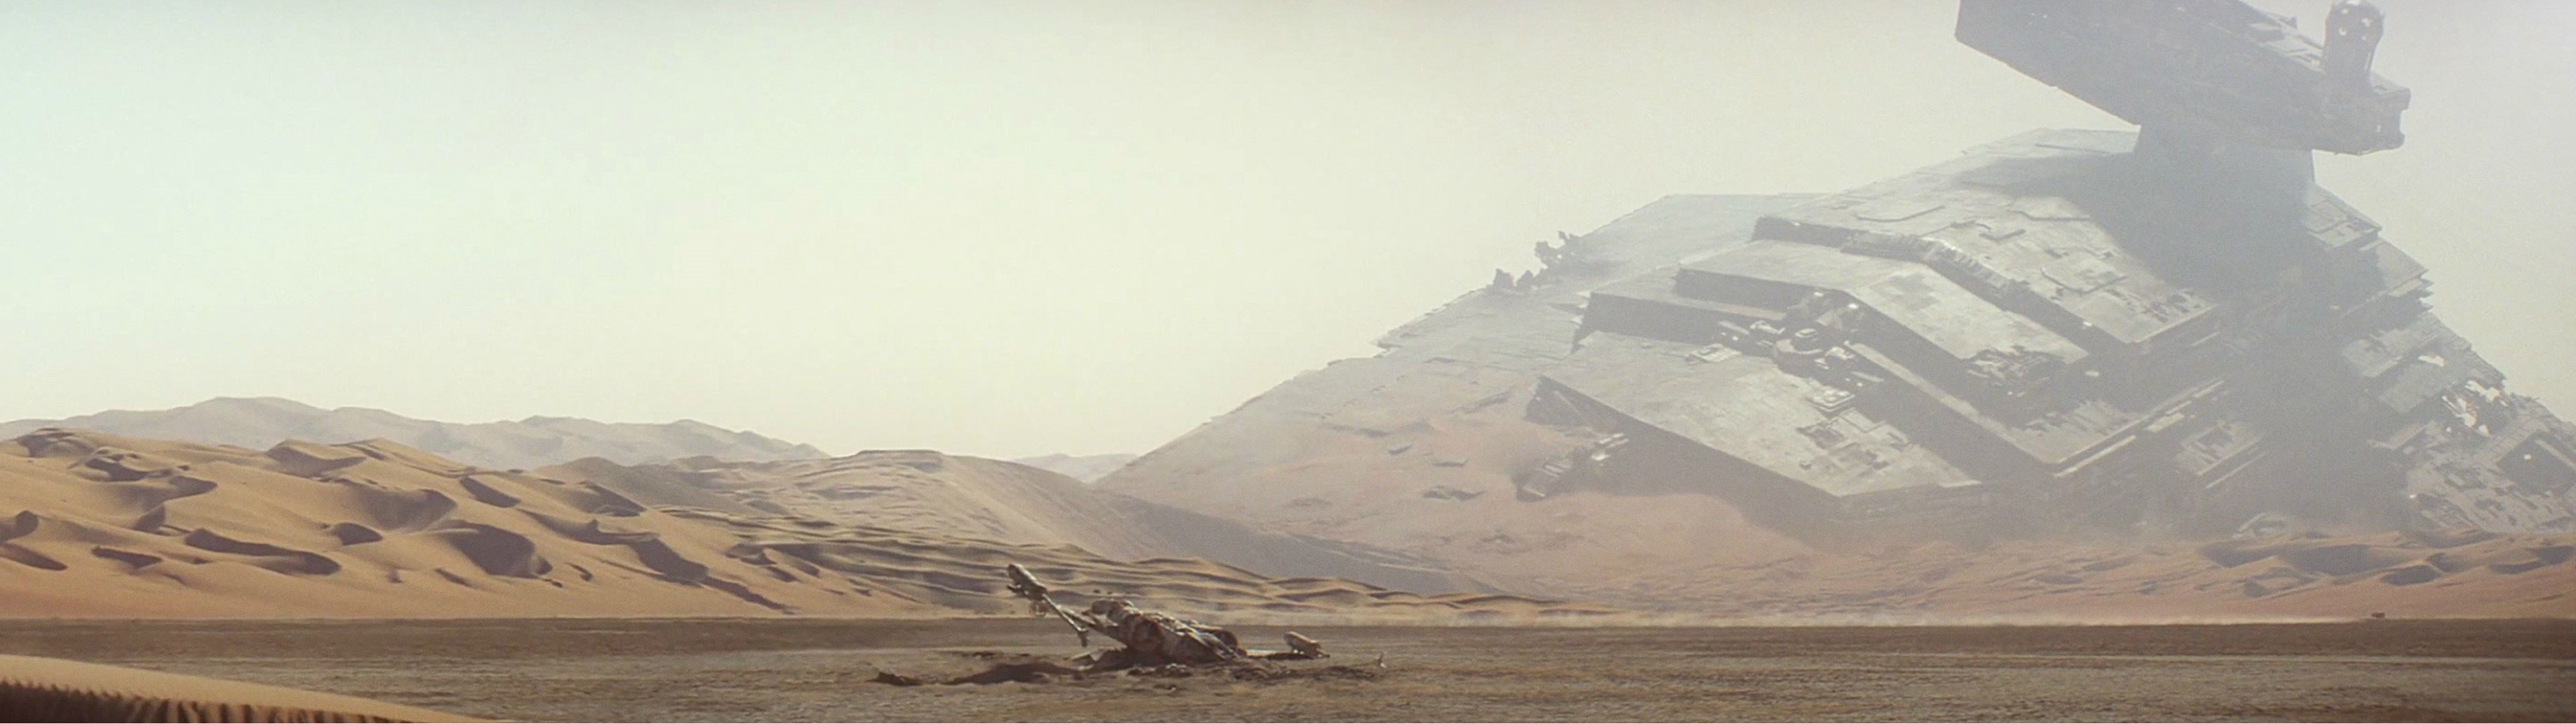 3840x1080 [5760x1080][] Spliced-together Crashed Star Destroyer Scene  (source in comments) : multiwall